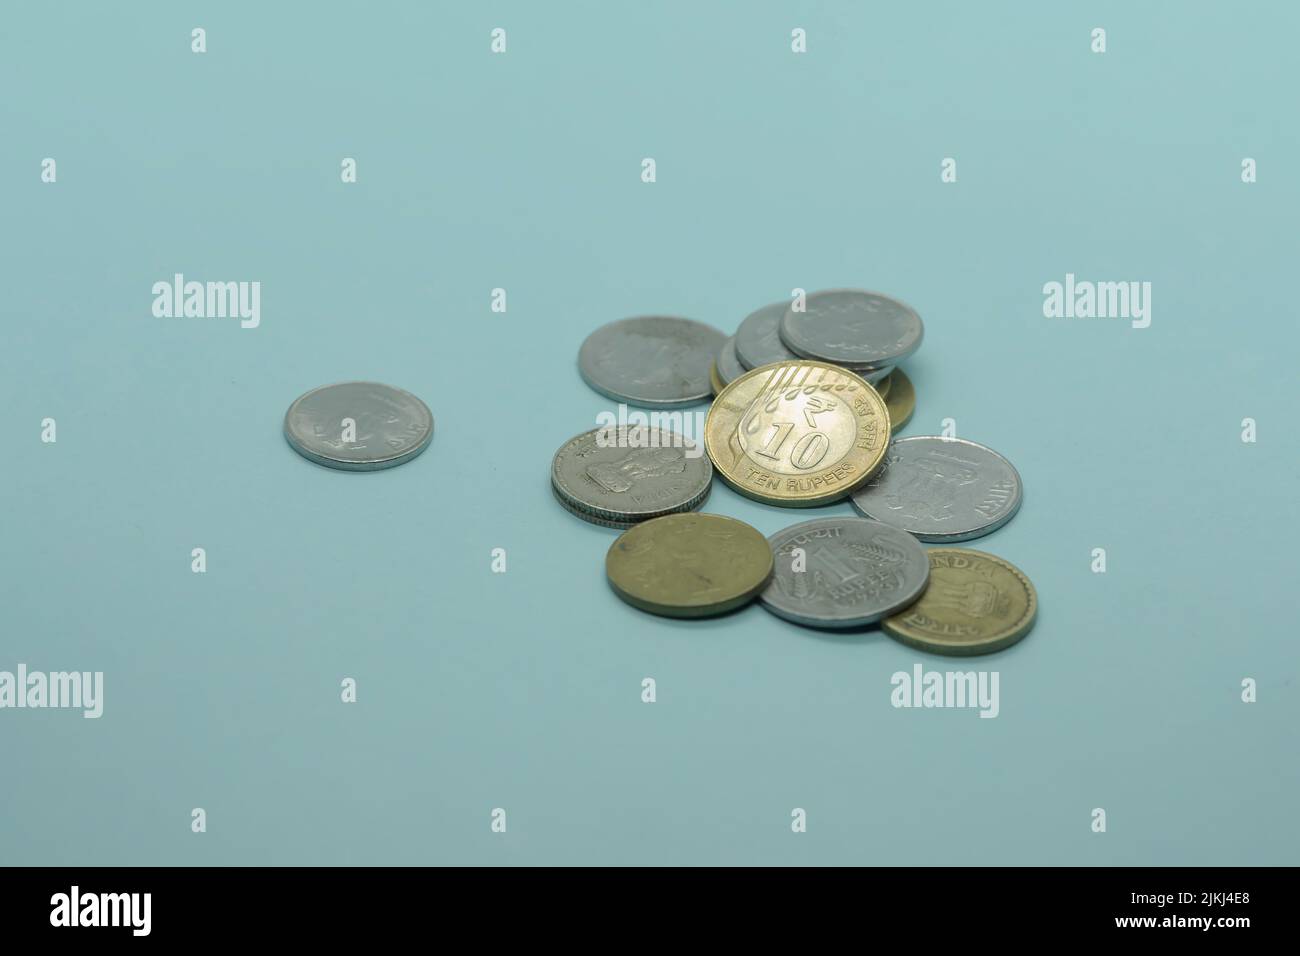 The Indian  1, 5, 10 rupee coins on the blue background Stock Photo